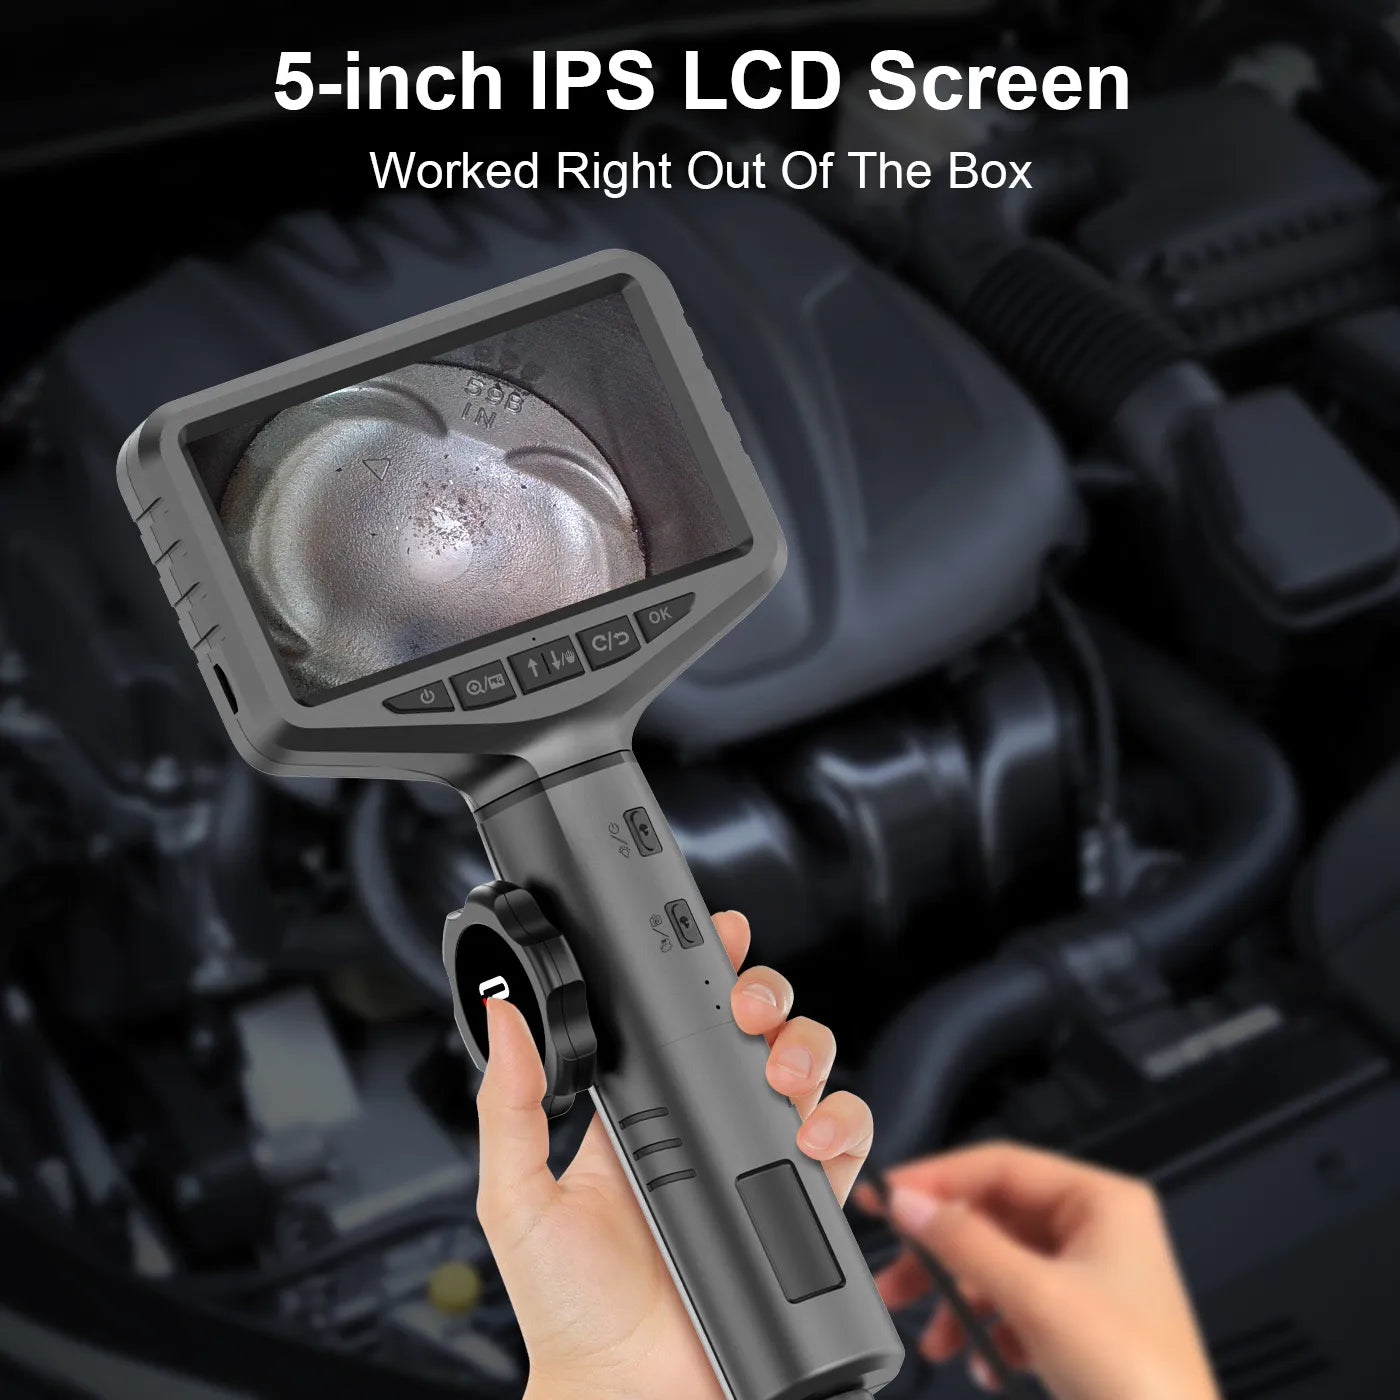 Borescope Inspection Camera - 5-inch IPS Color Screen Two-Way Single Lens Articulating Camera